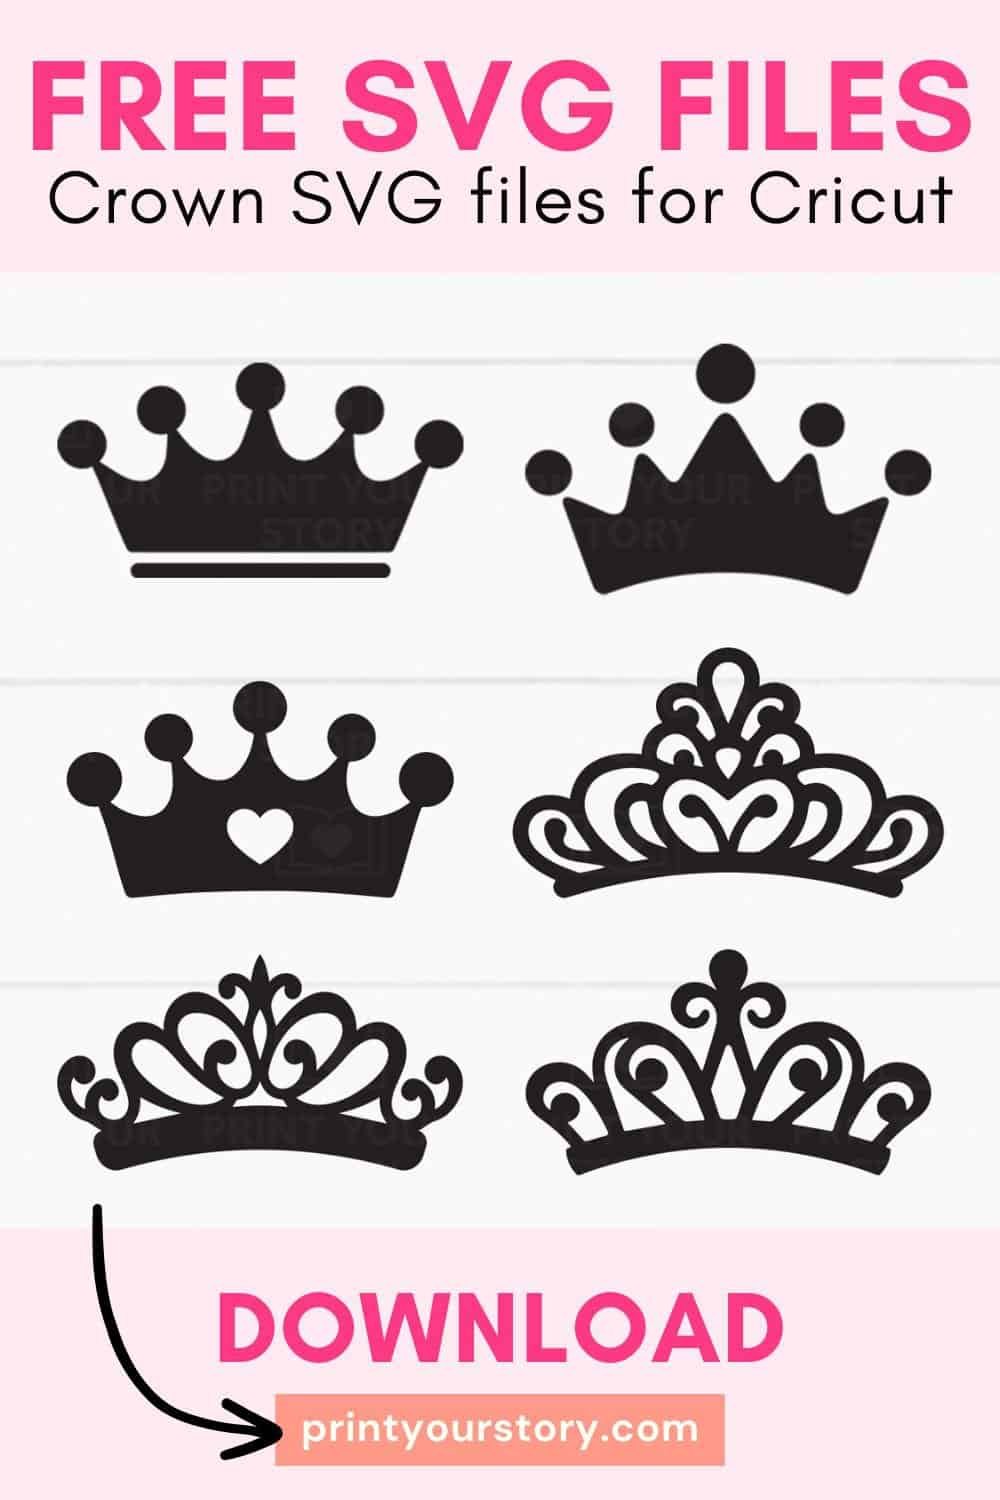 Free Crown SVG files for Personal Use